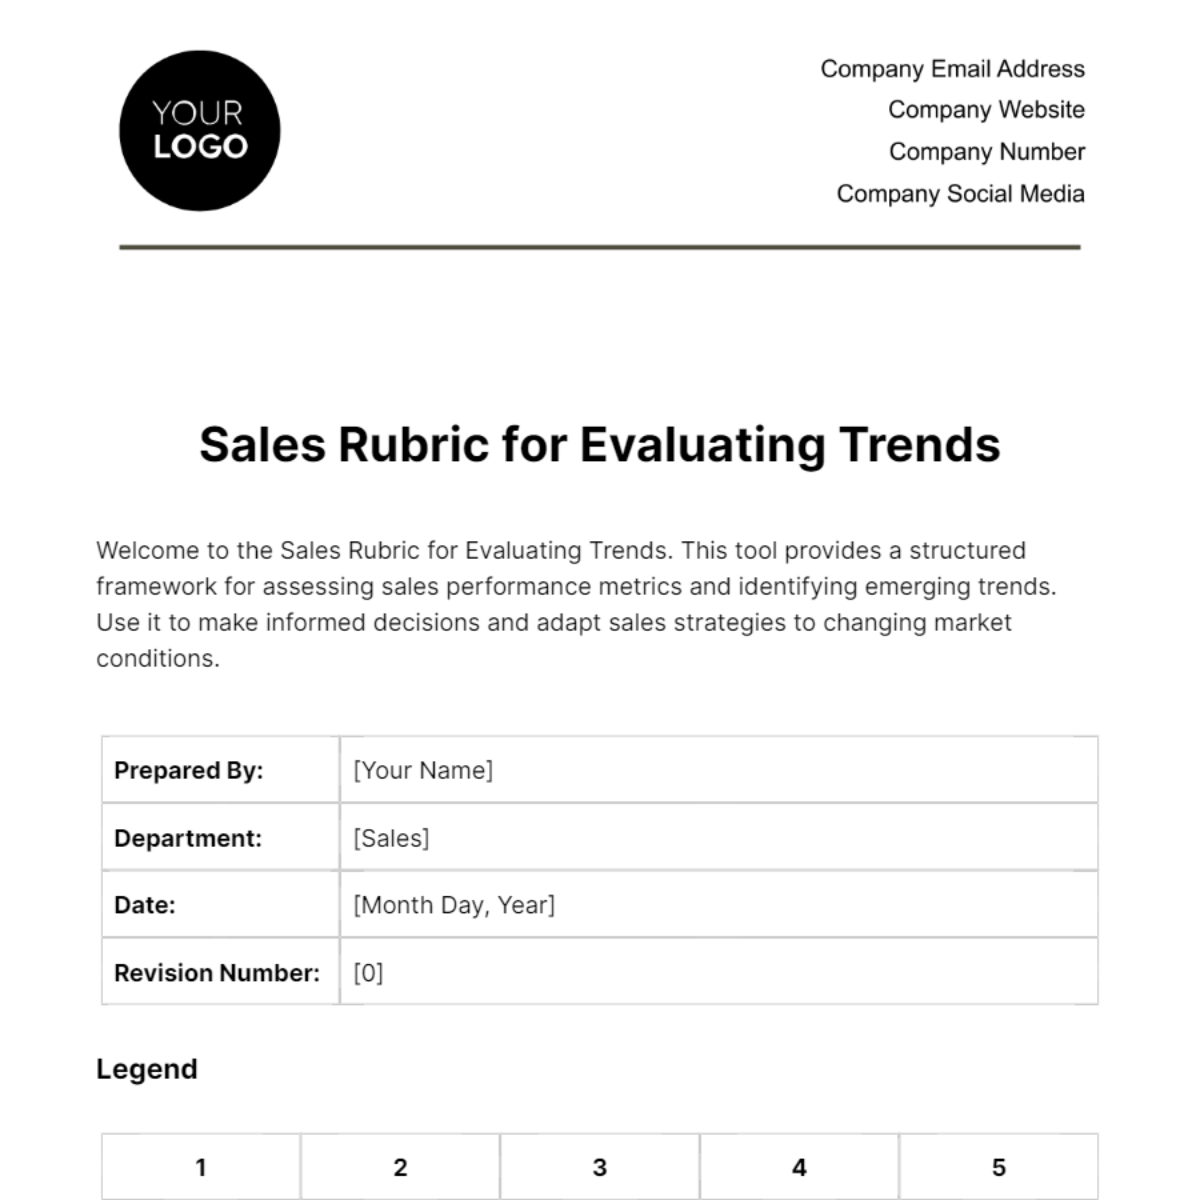 Free Sales Rubric for Evaluating Trends Template